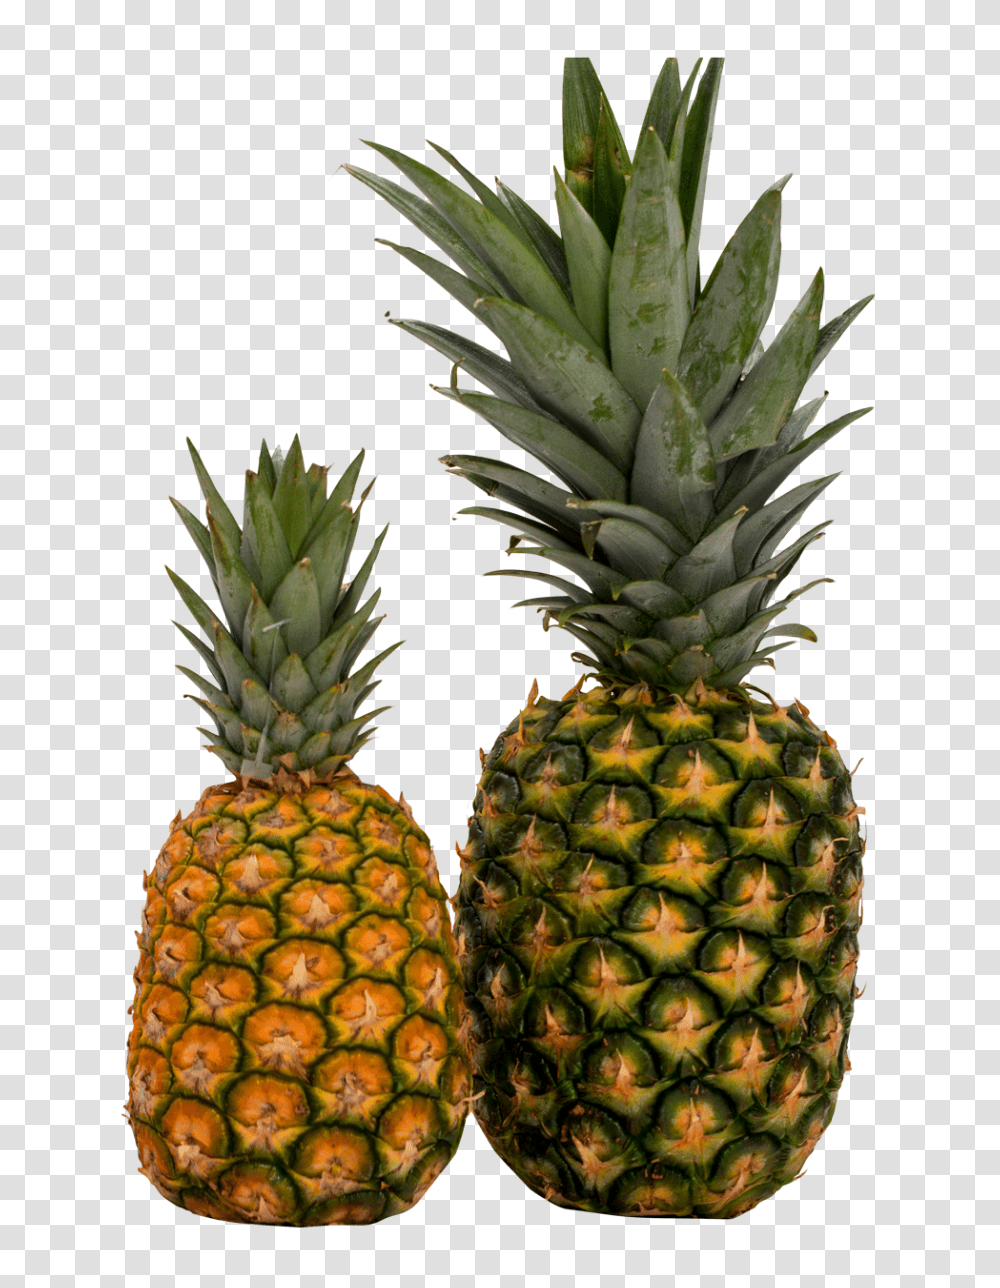 Two Pineapple Image, Fruit, Plant, Food Transparent Png